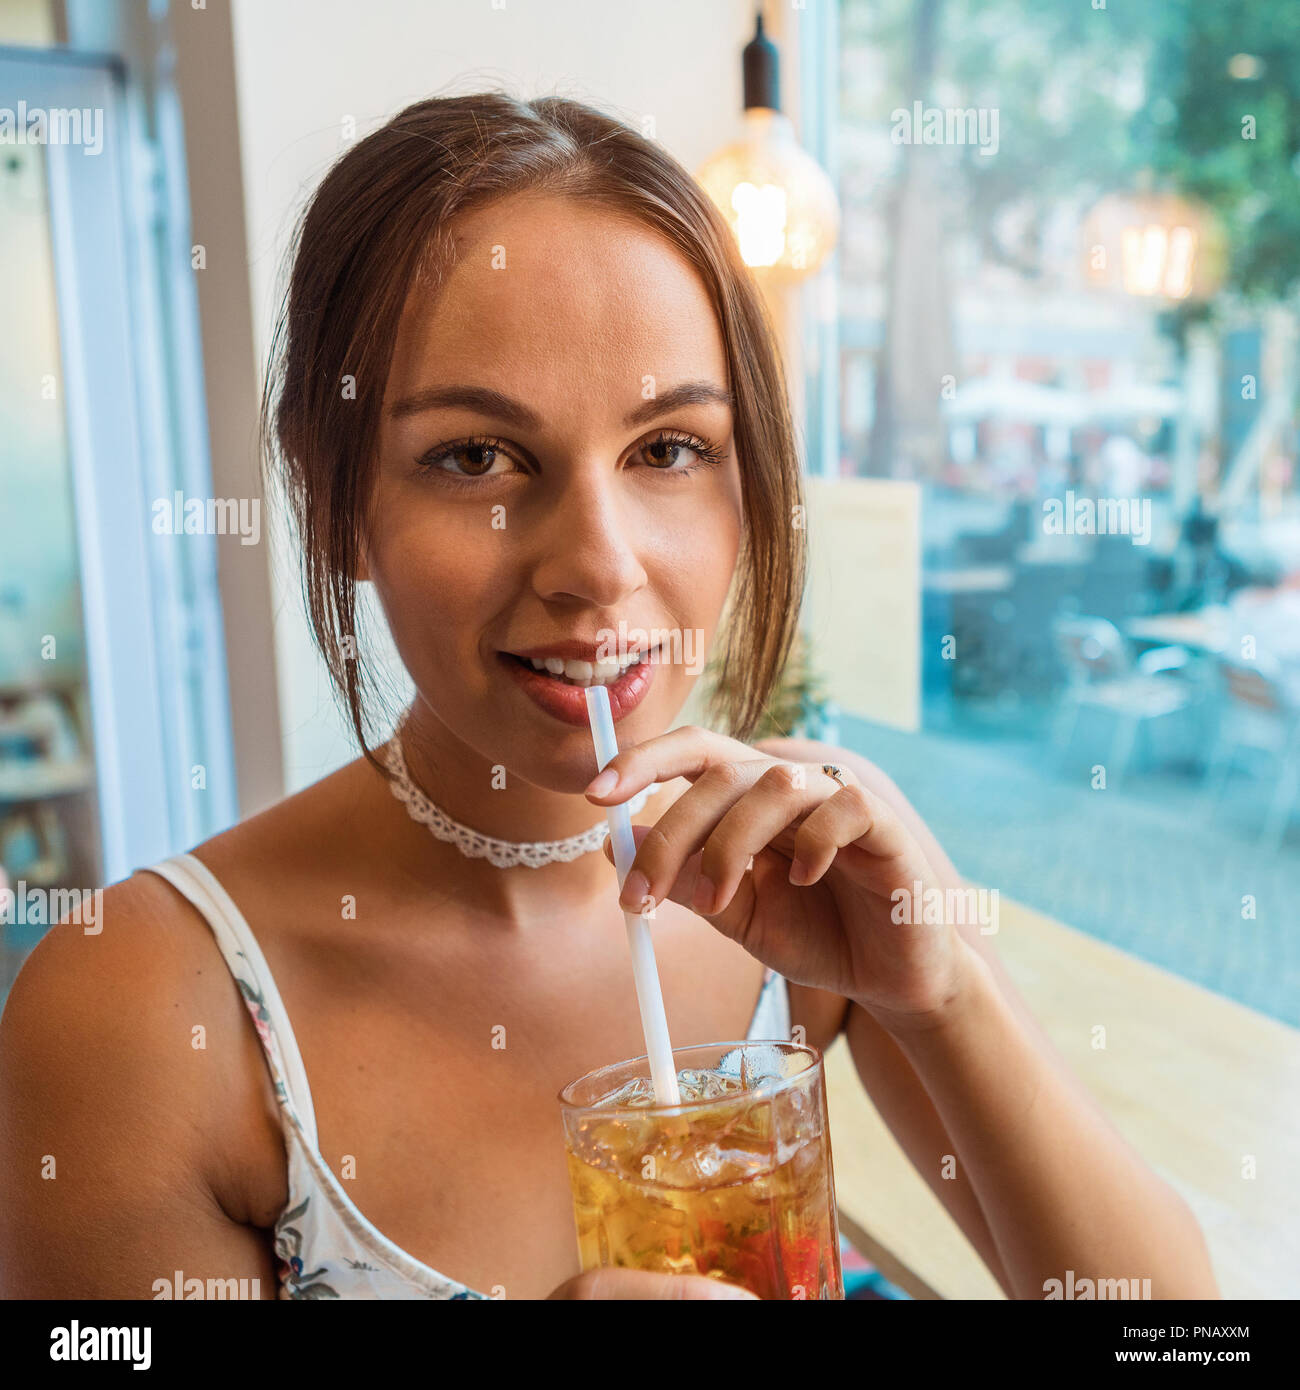 Young brunette woman having ice tea at a café Stock Photo